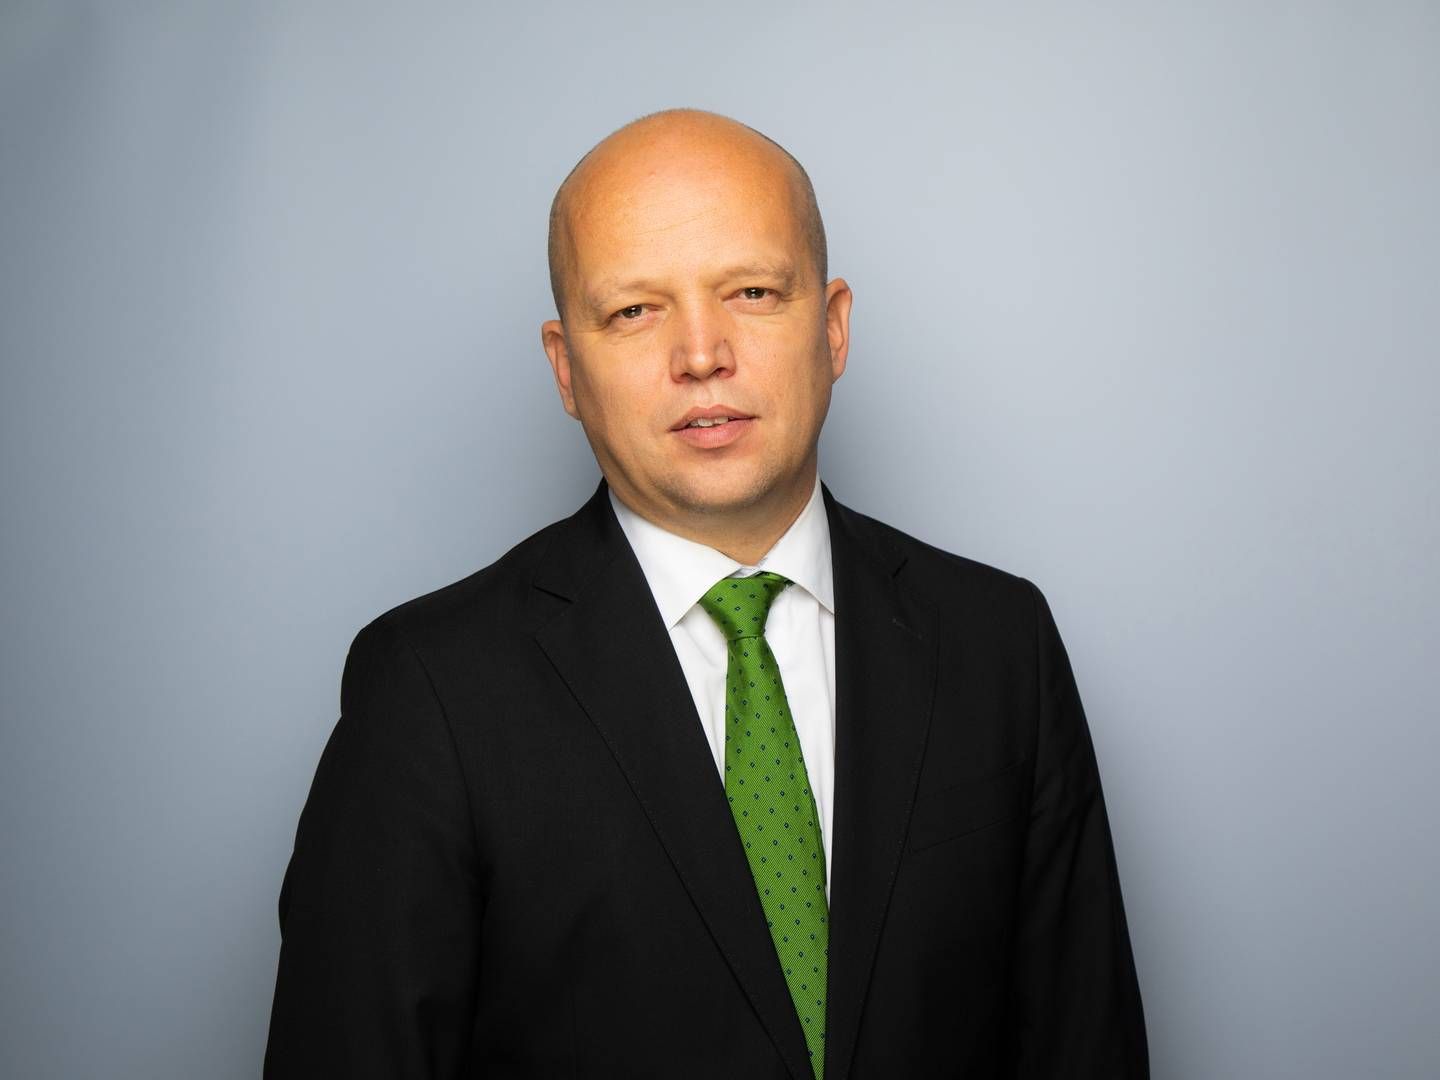 Norway's Minister of Finance, Trygve Slagsvold Vedum, is delaying the decision on whether to allow the oil fund to make private equity investments. | Photo: NTB Kommunikasjon/Statsministerens kontor